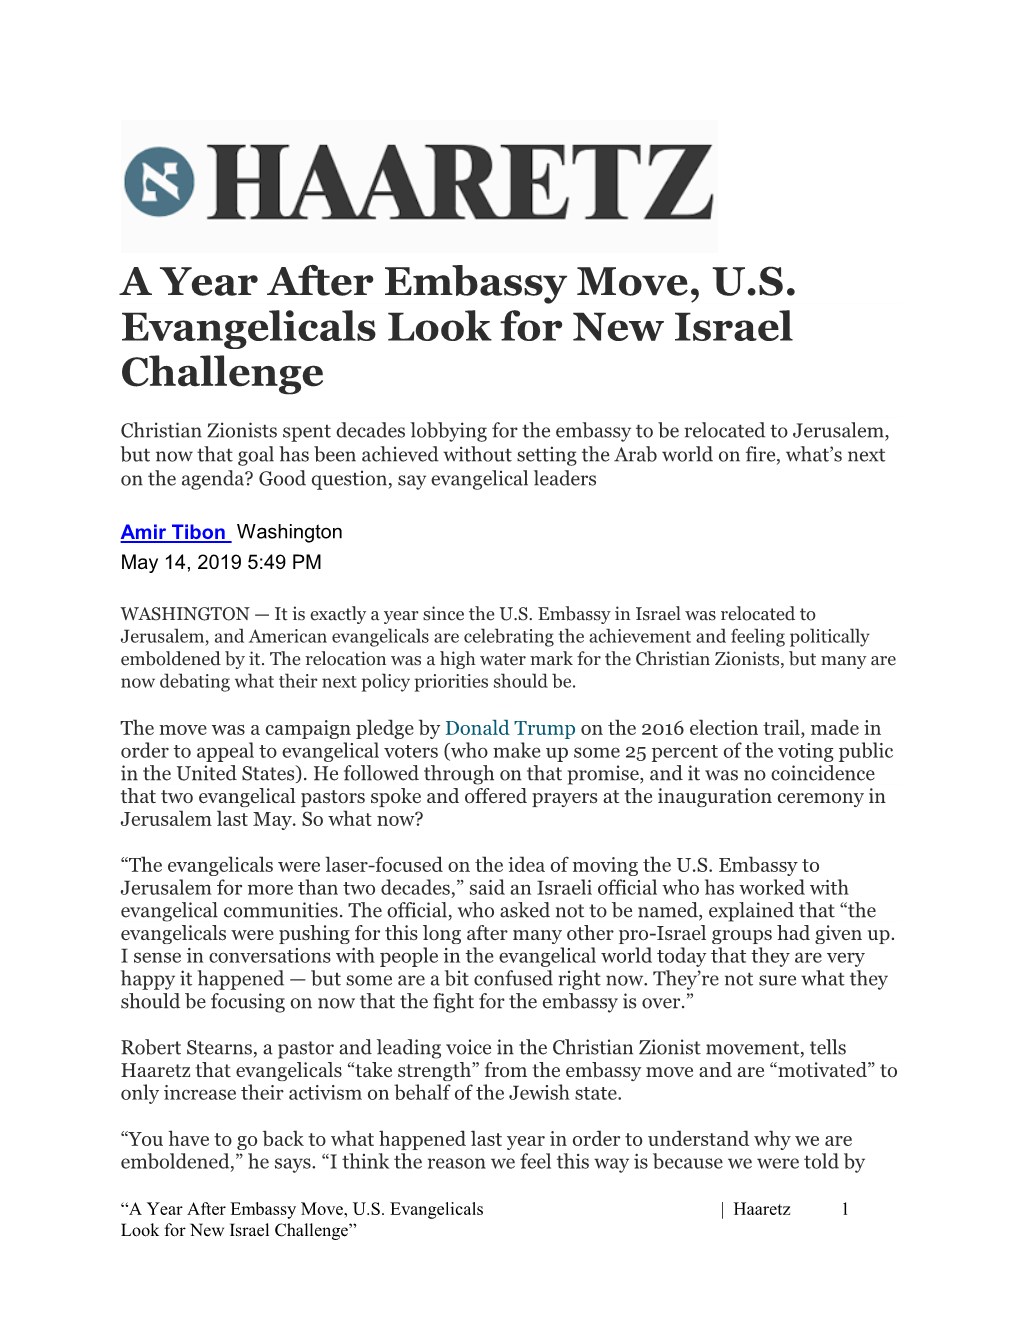 A Year After Embassy Move, U.S. Evangelicals Look for New Israel Challenge